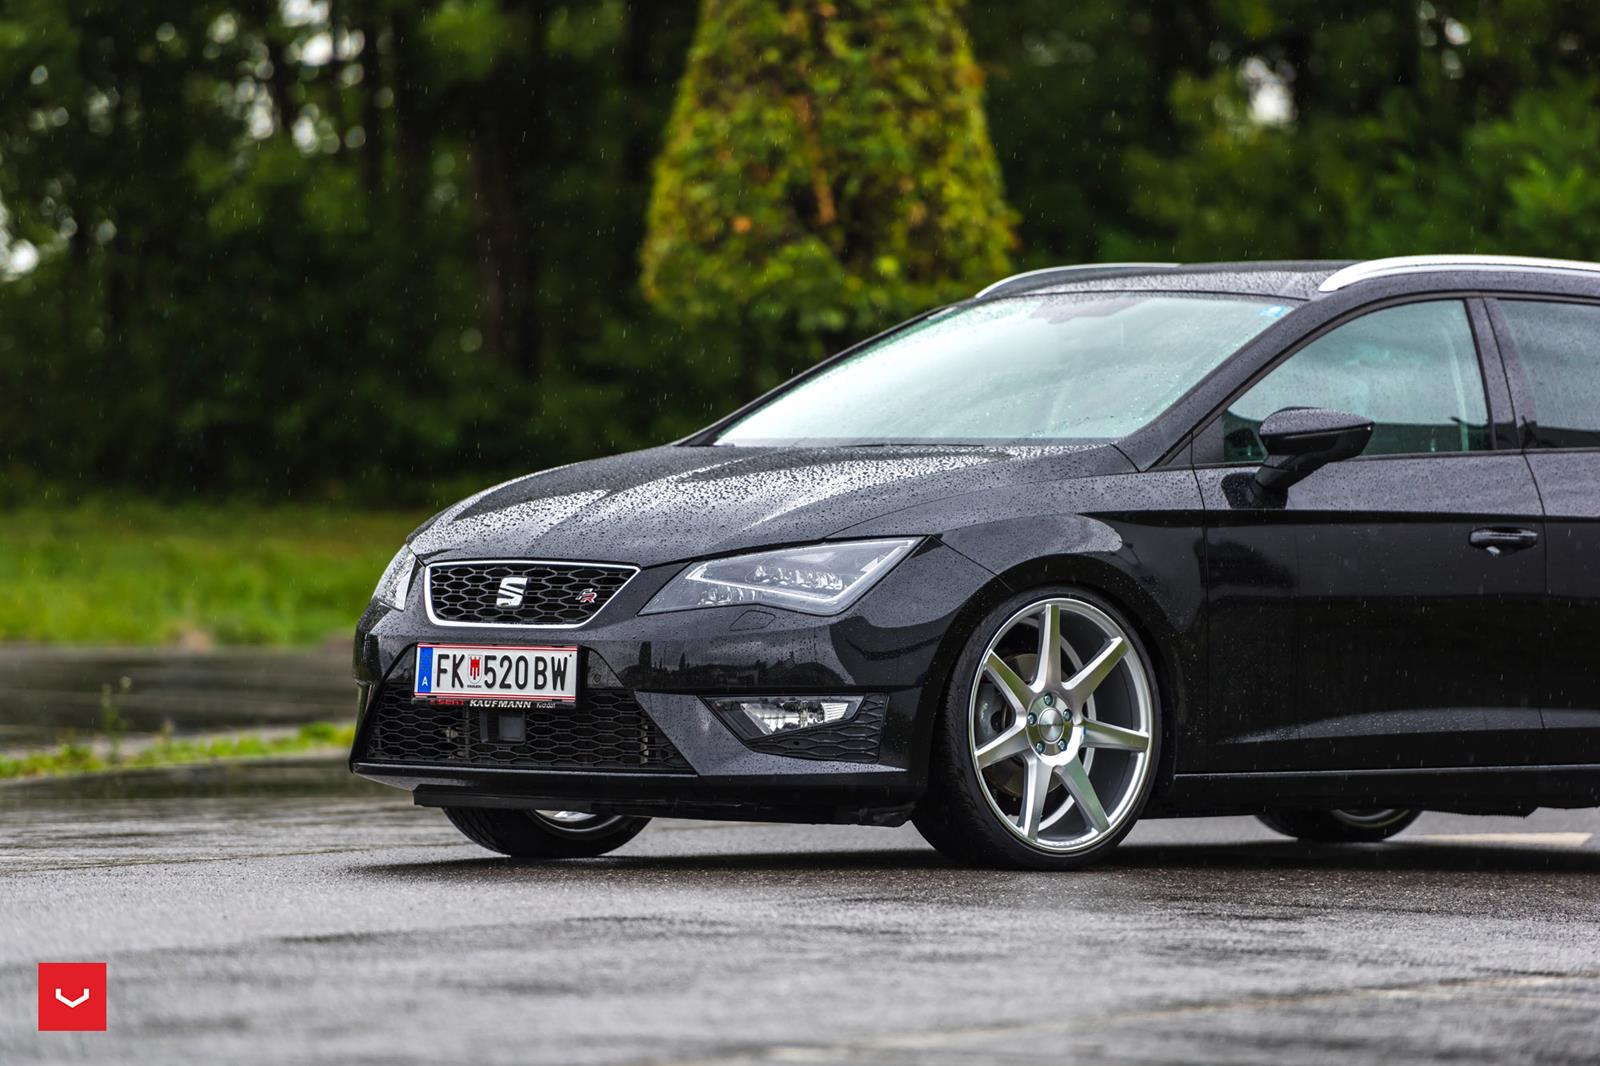 SEAT LEON 5F FR 2.0 TDI (184 Hp) 2013 ->, Seat, exhaust systems